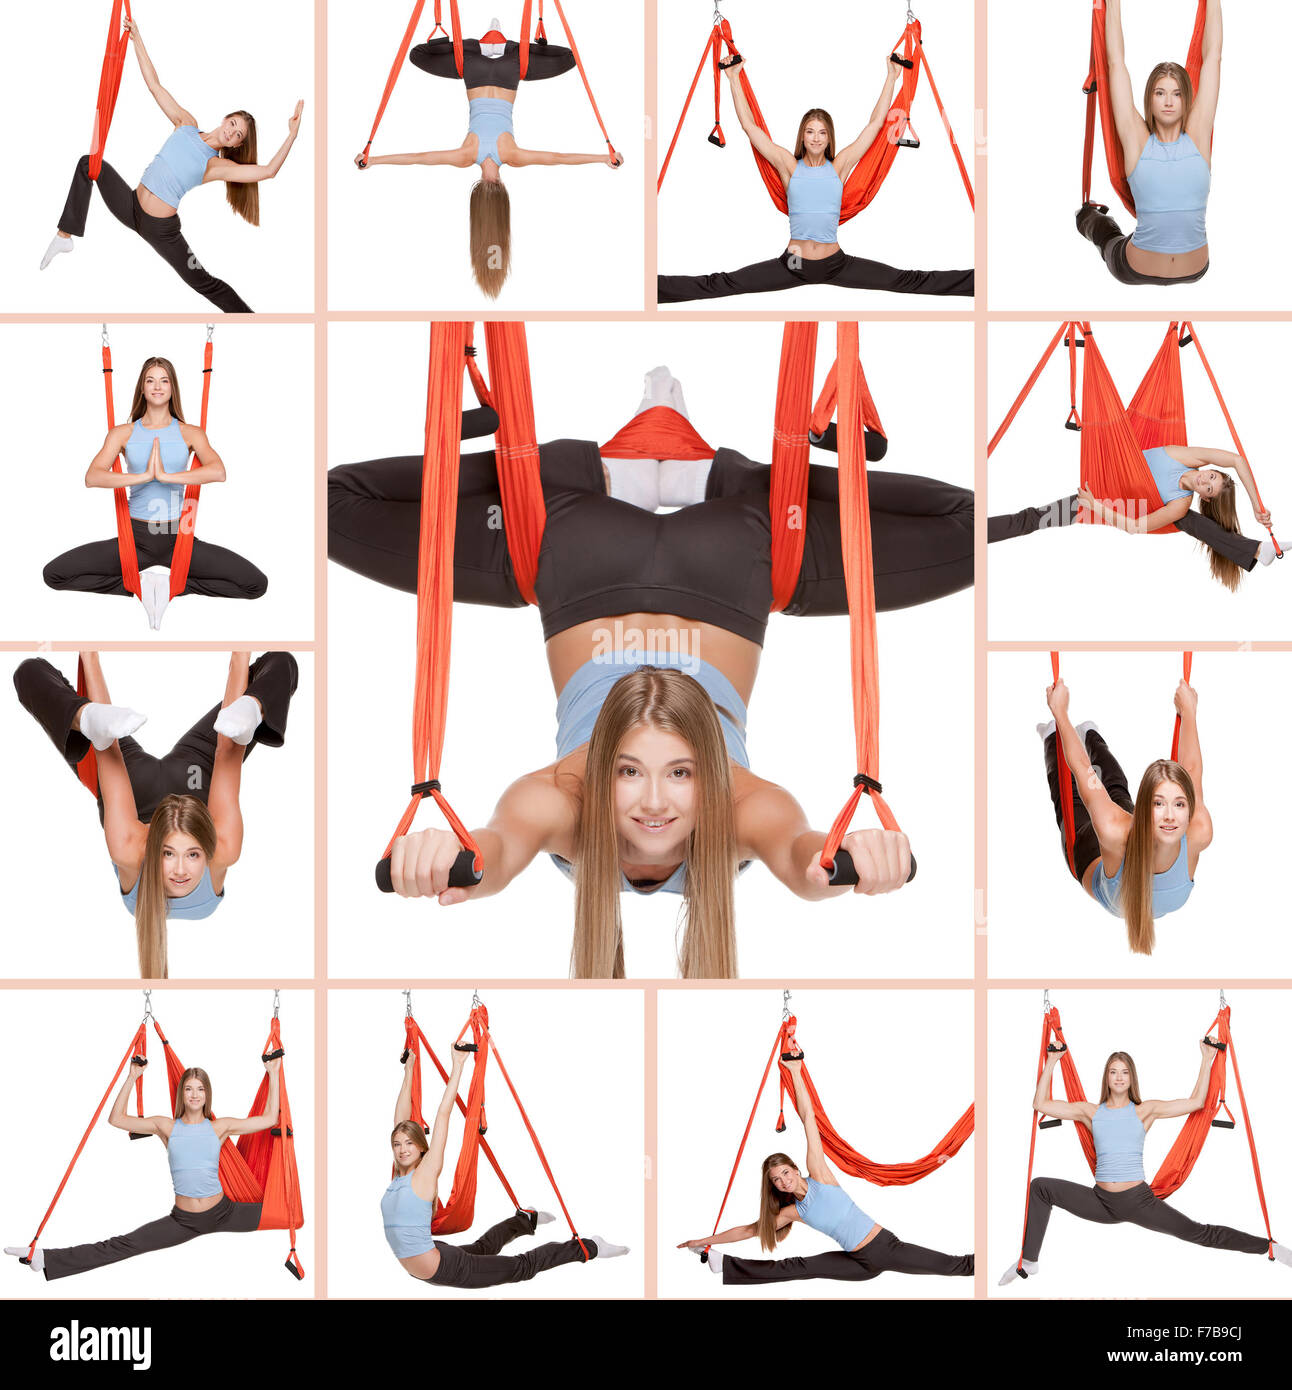 Aerial Yoga: Safety Tips, Benefits, and 5 Poses To Try